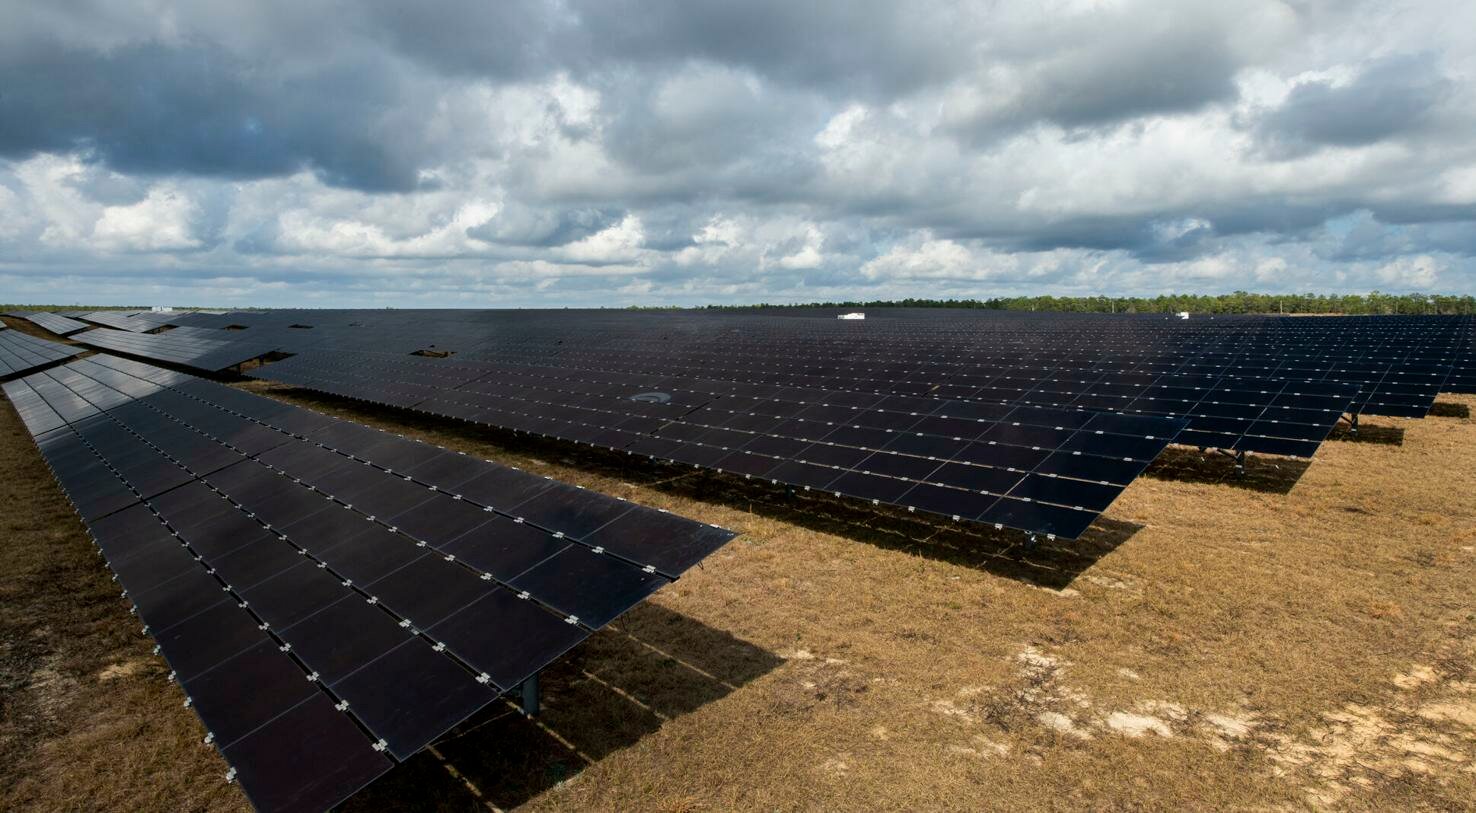 The approximately 240-acre solar panel field on Eglin Air Force Base, Fla. generates around 30 megawatts. The amount produced from the 375,000 panels equals about 20% of Eglin’s energy usage. The solar field is managed and maintained by Florida Power and Light.